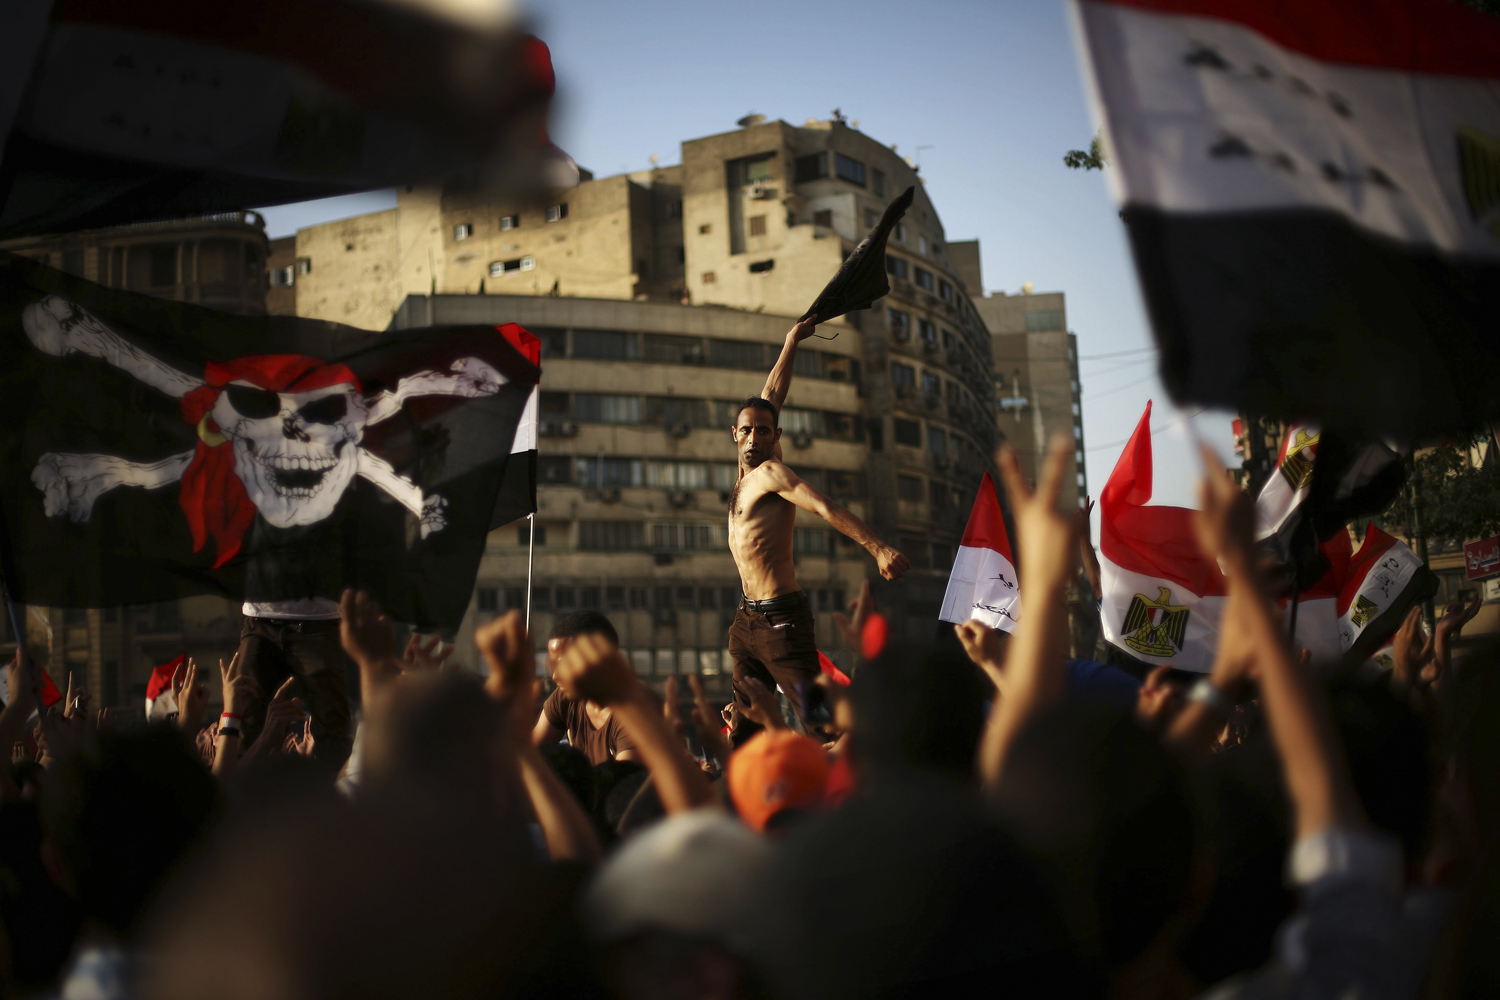 June 2, 2012. Protesters gather after the verdict in the trial of former President Hosni Mubarak in Tahrir Square in Cairo.